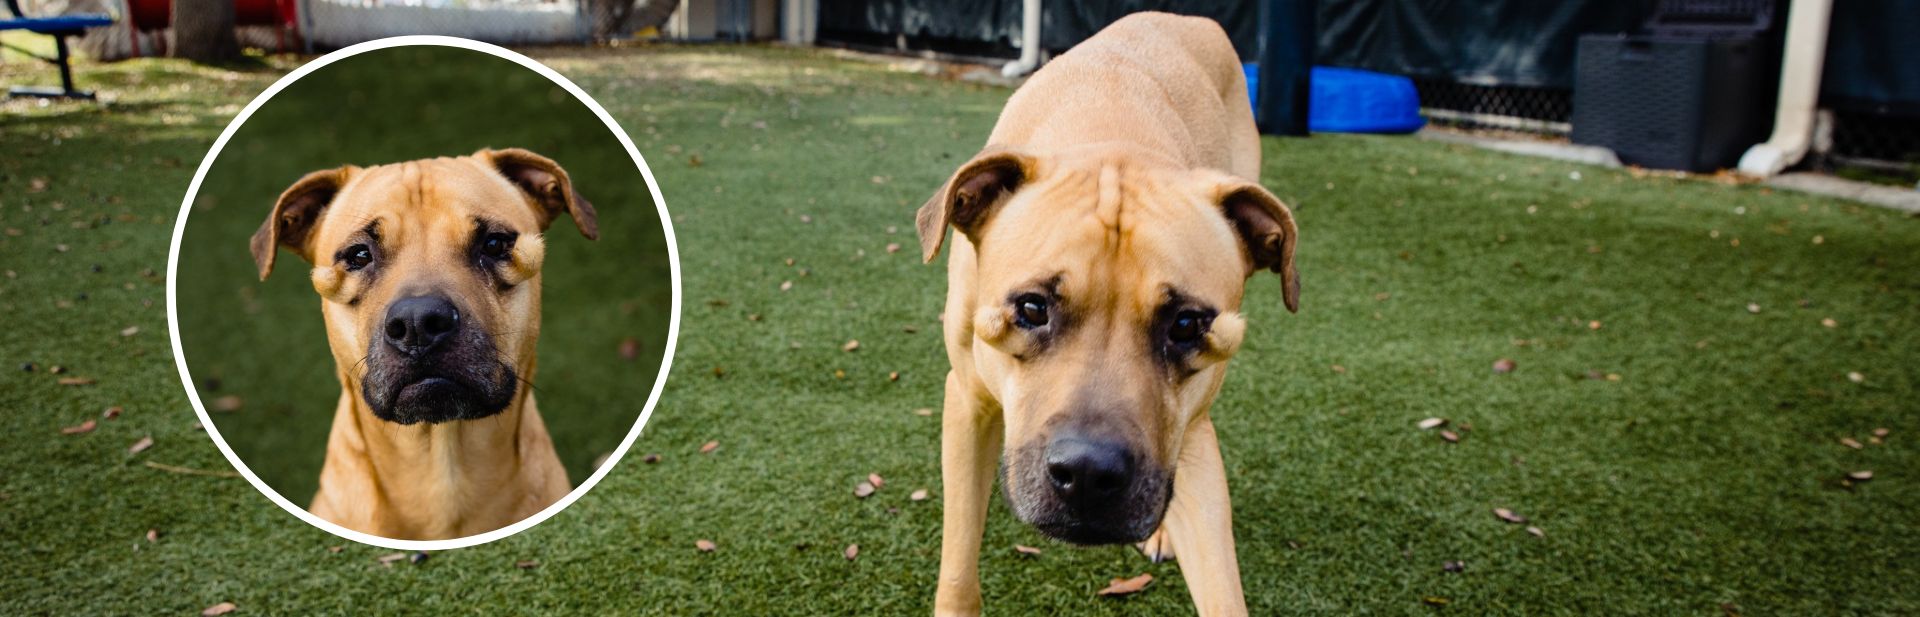 Shelter Dog With Unusual Looks Wins Over the Heart of a Loving Family